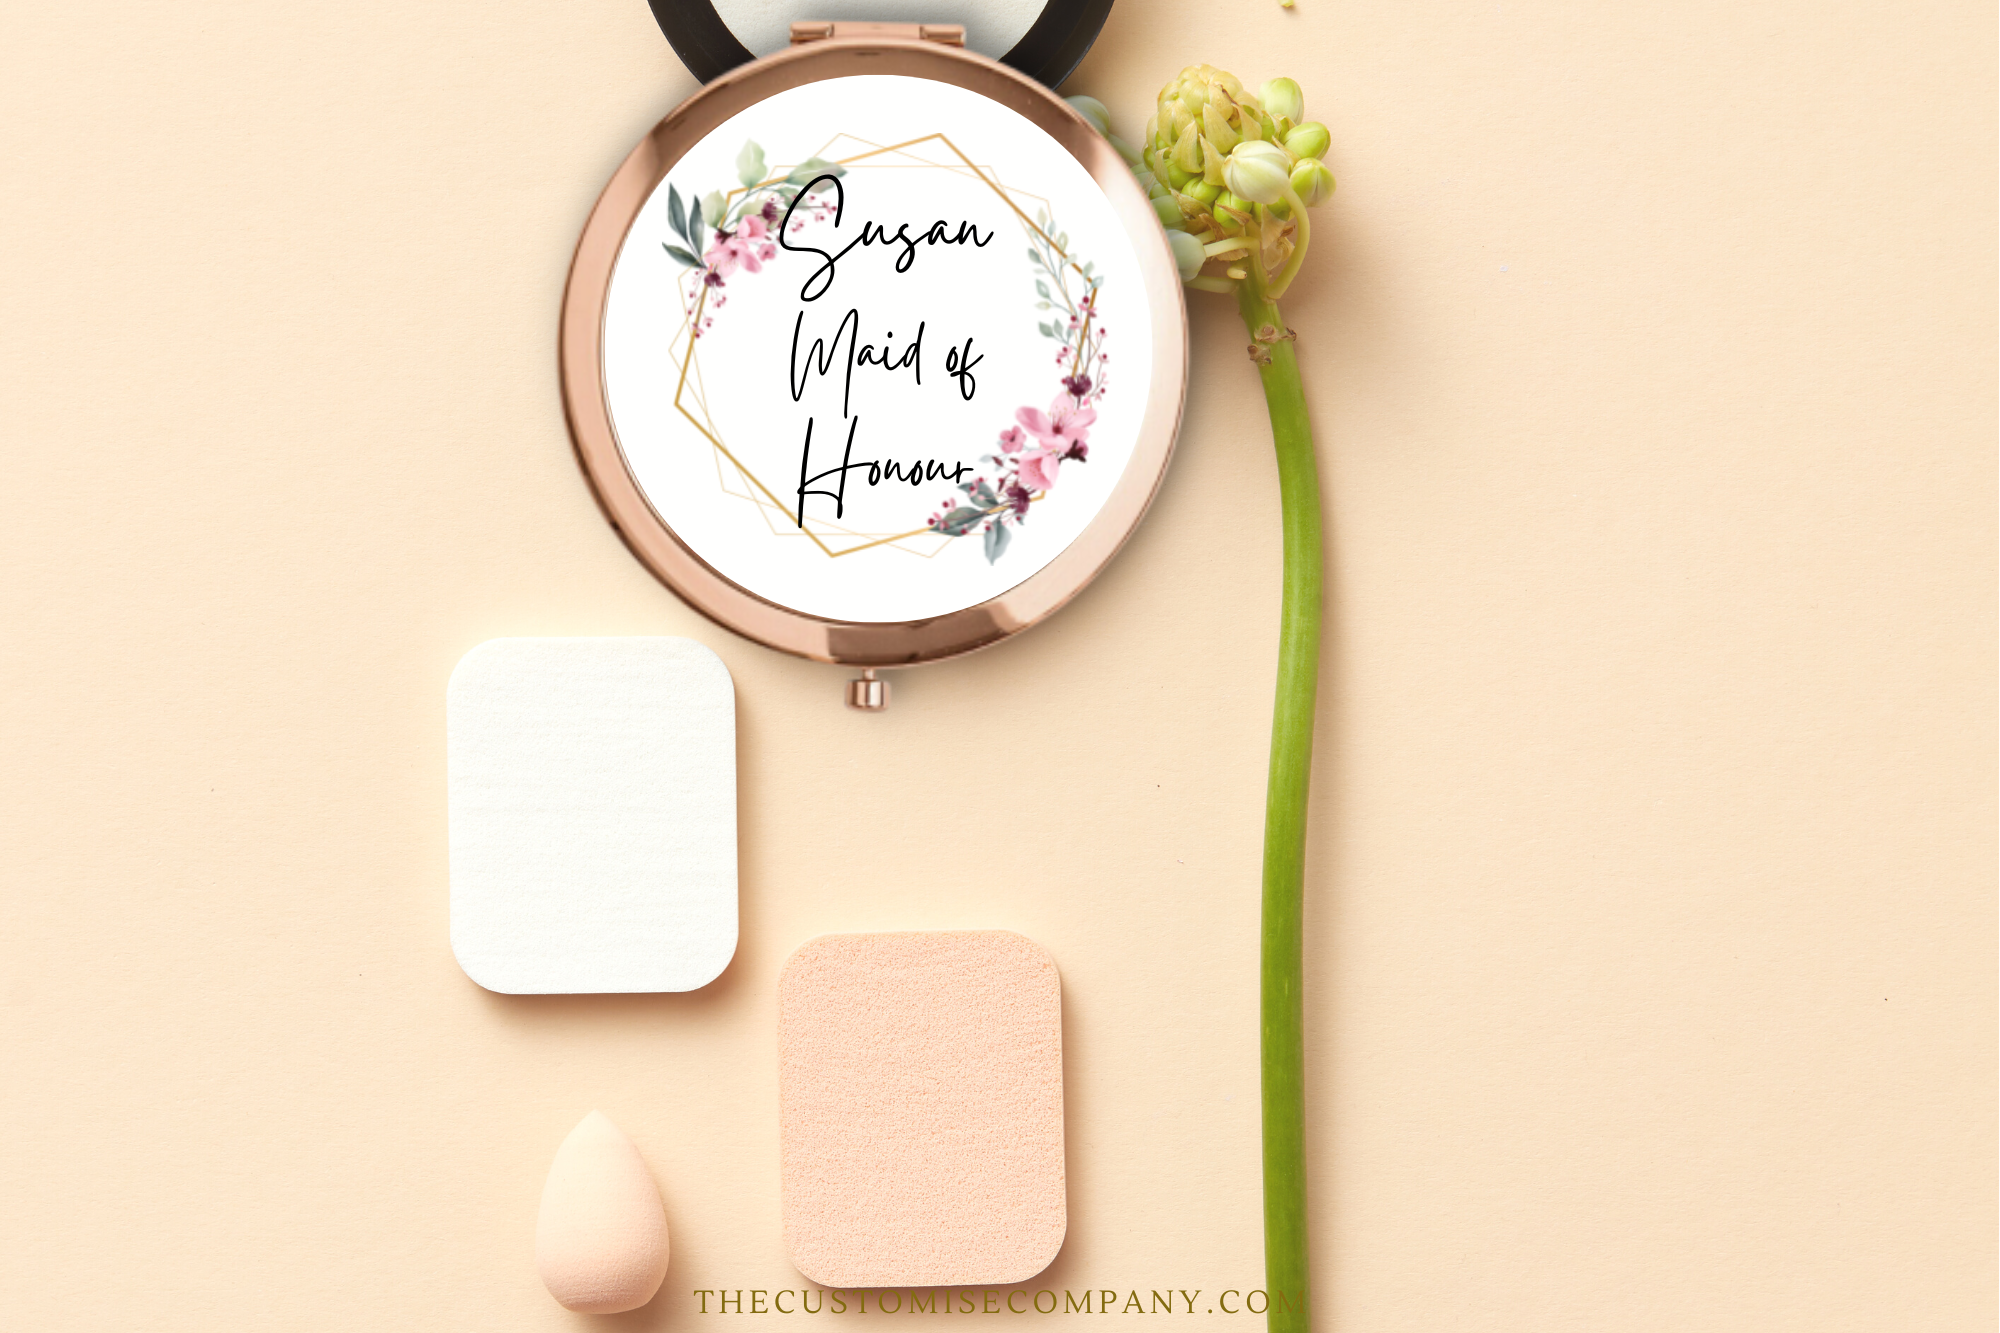 Personalised Compact Mirrors for Maid of Honour with Pink Floral Details